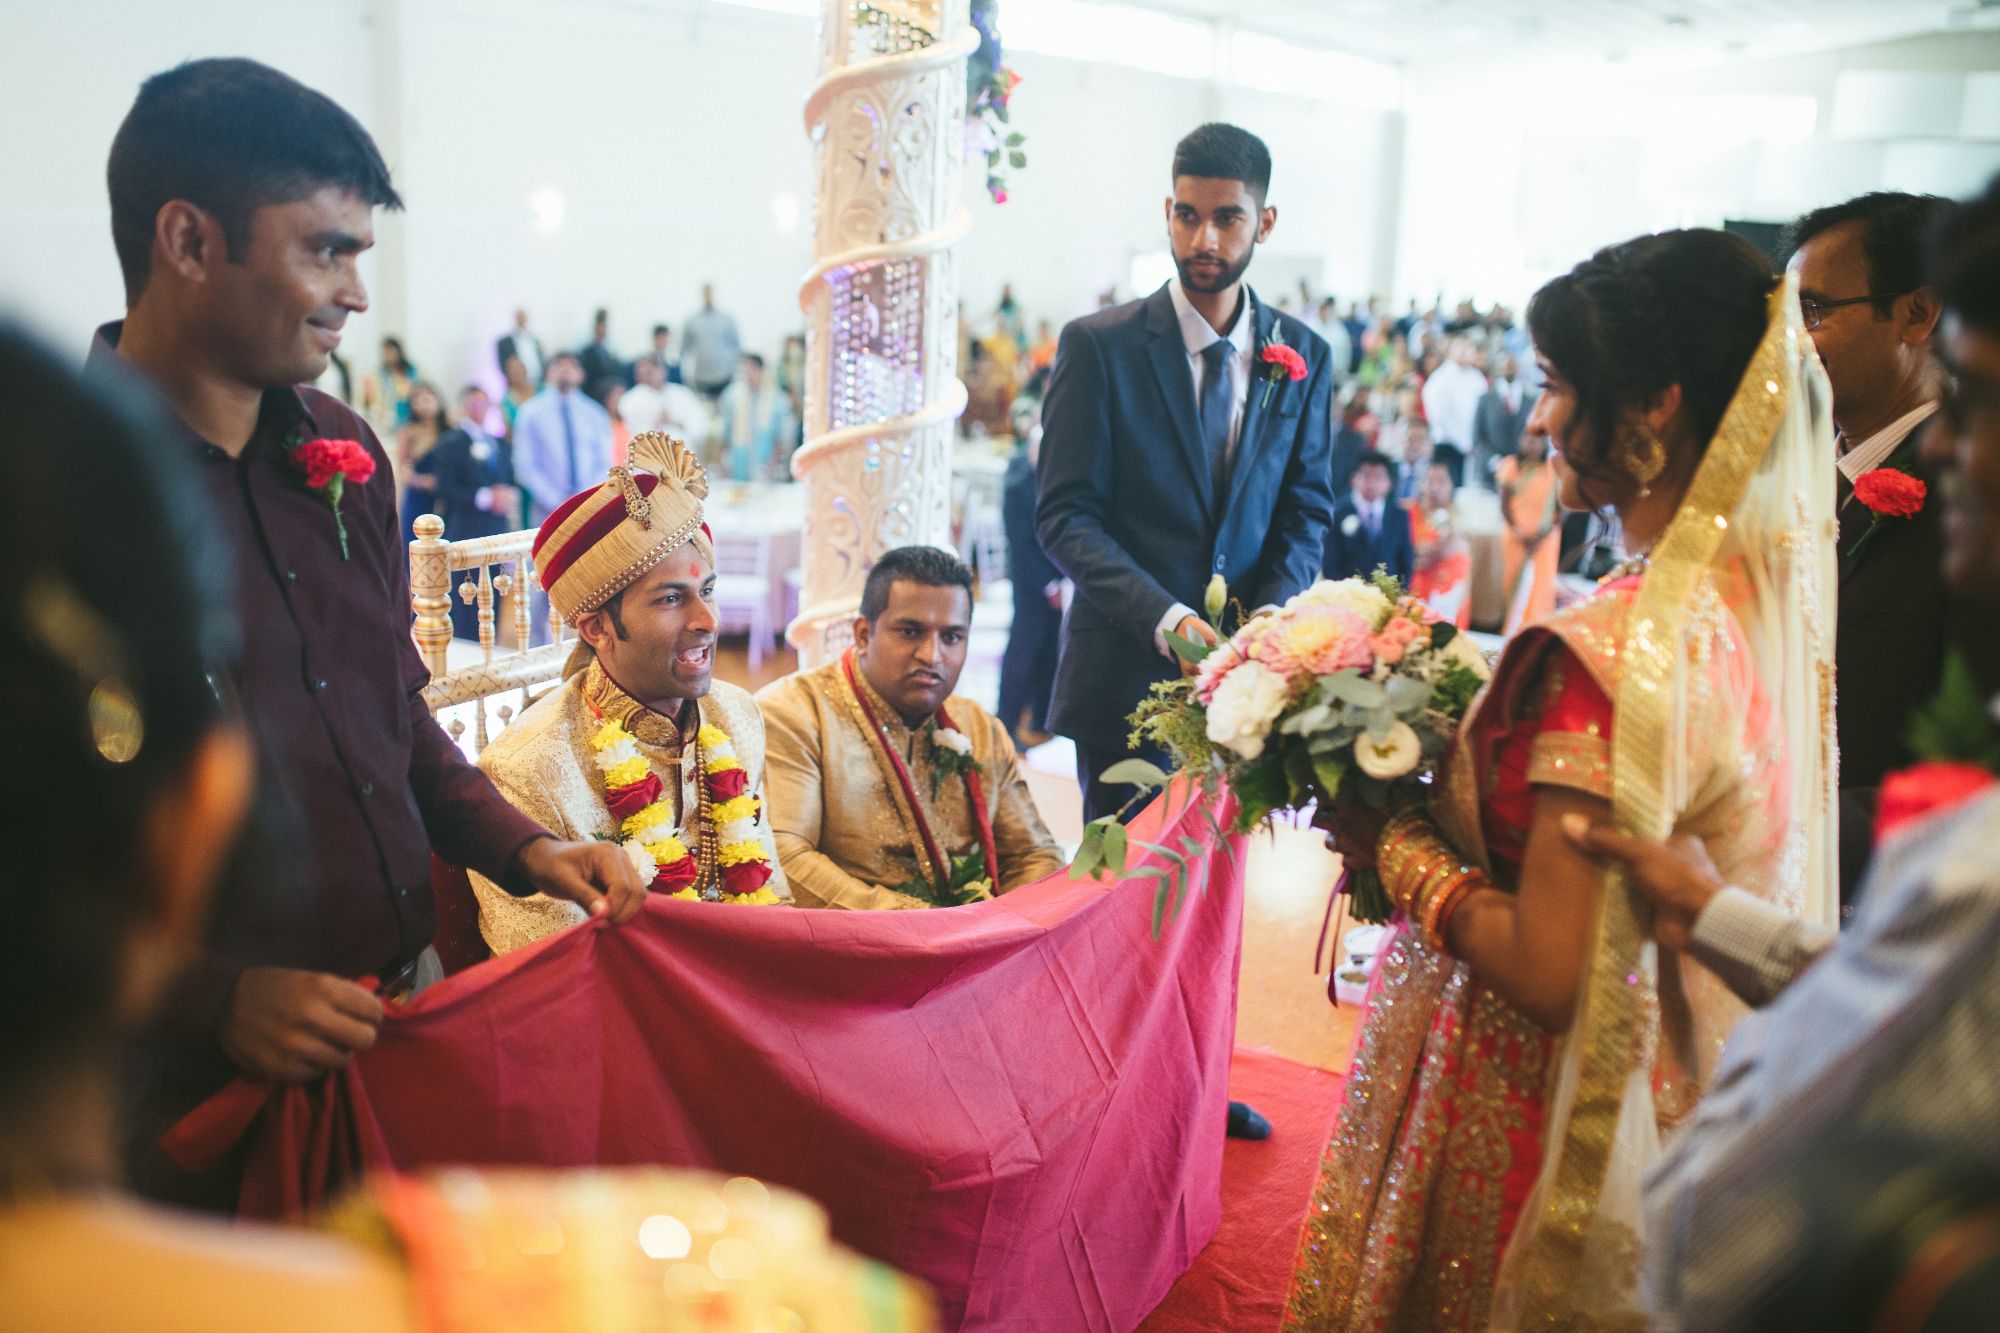 First look from an Indian ceremony.